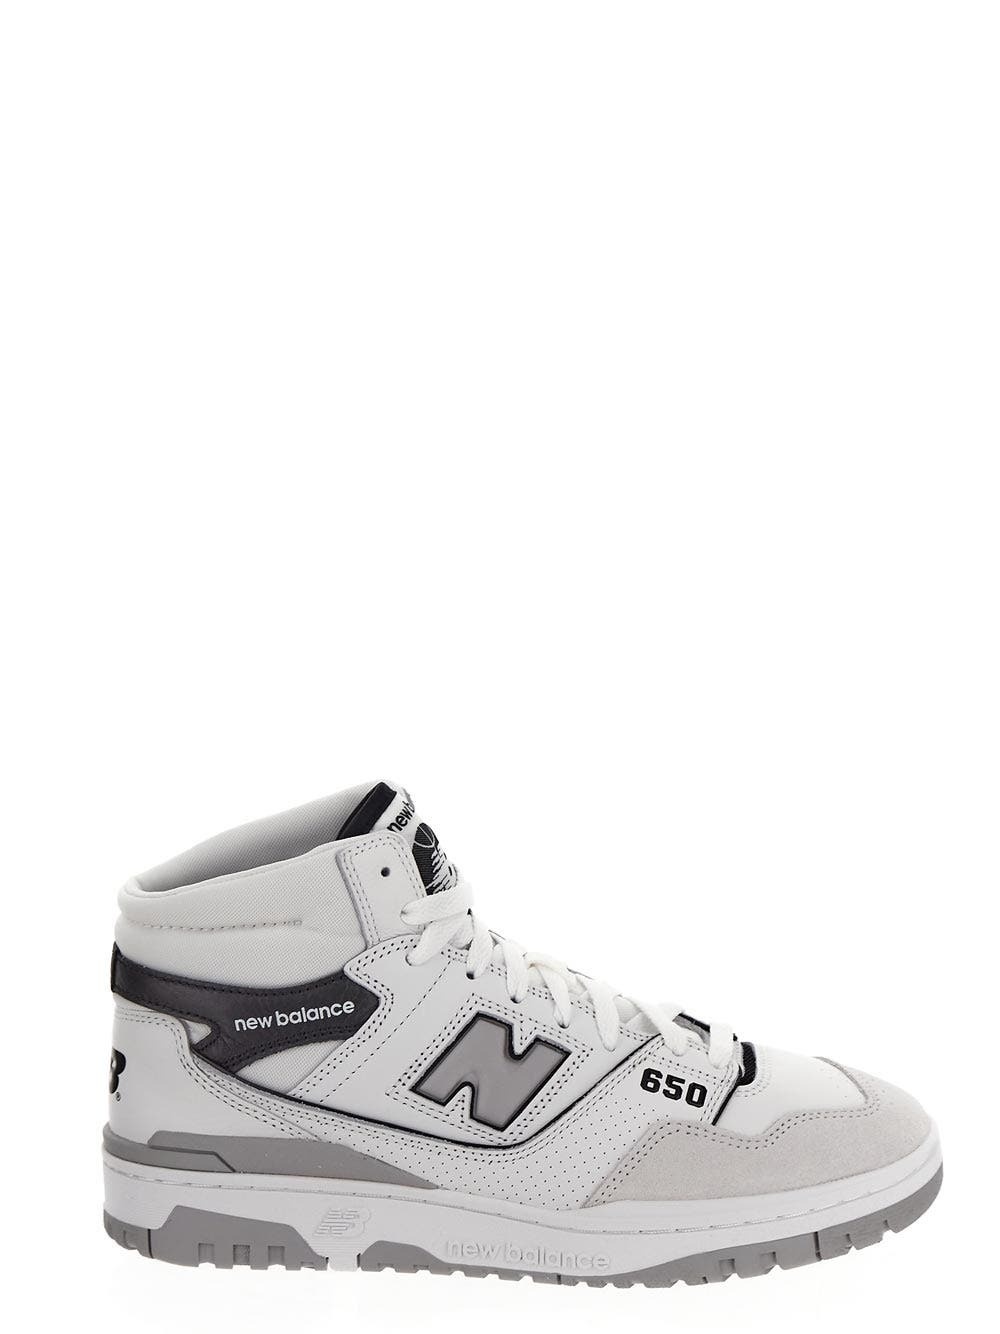 Photo: New Balance 650 High Top Sneakers